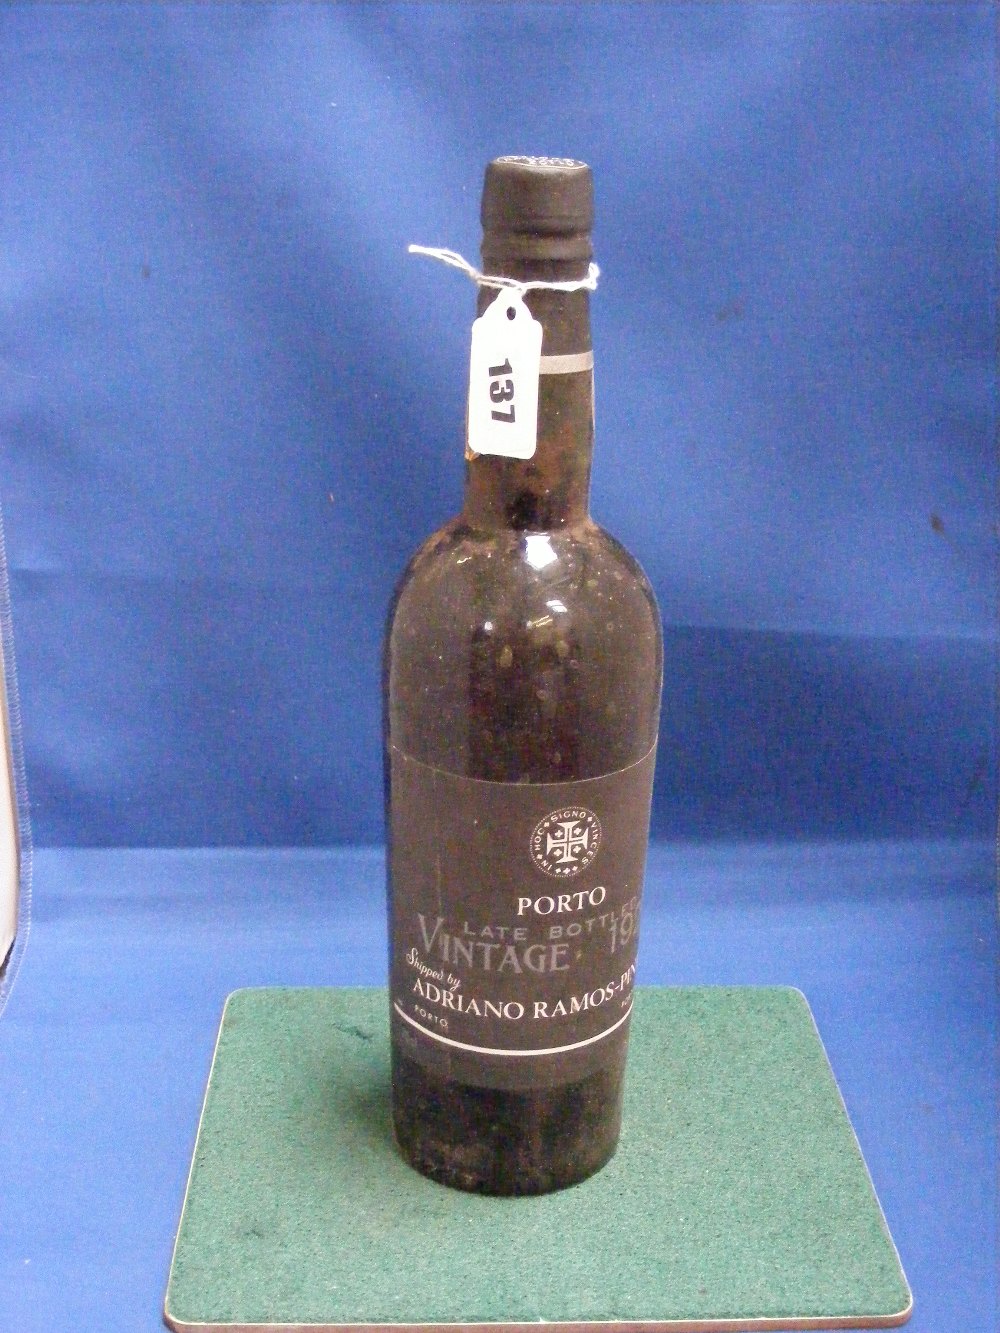 A vintage 1927 port, shipped by D. Ramos.